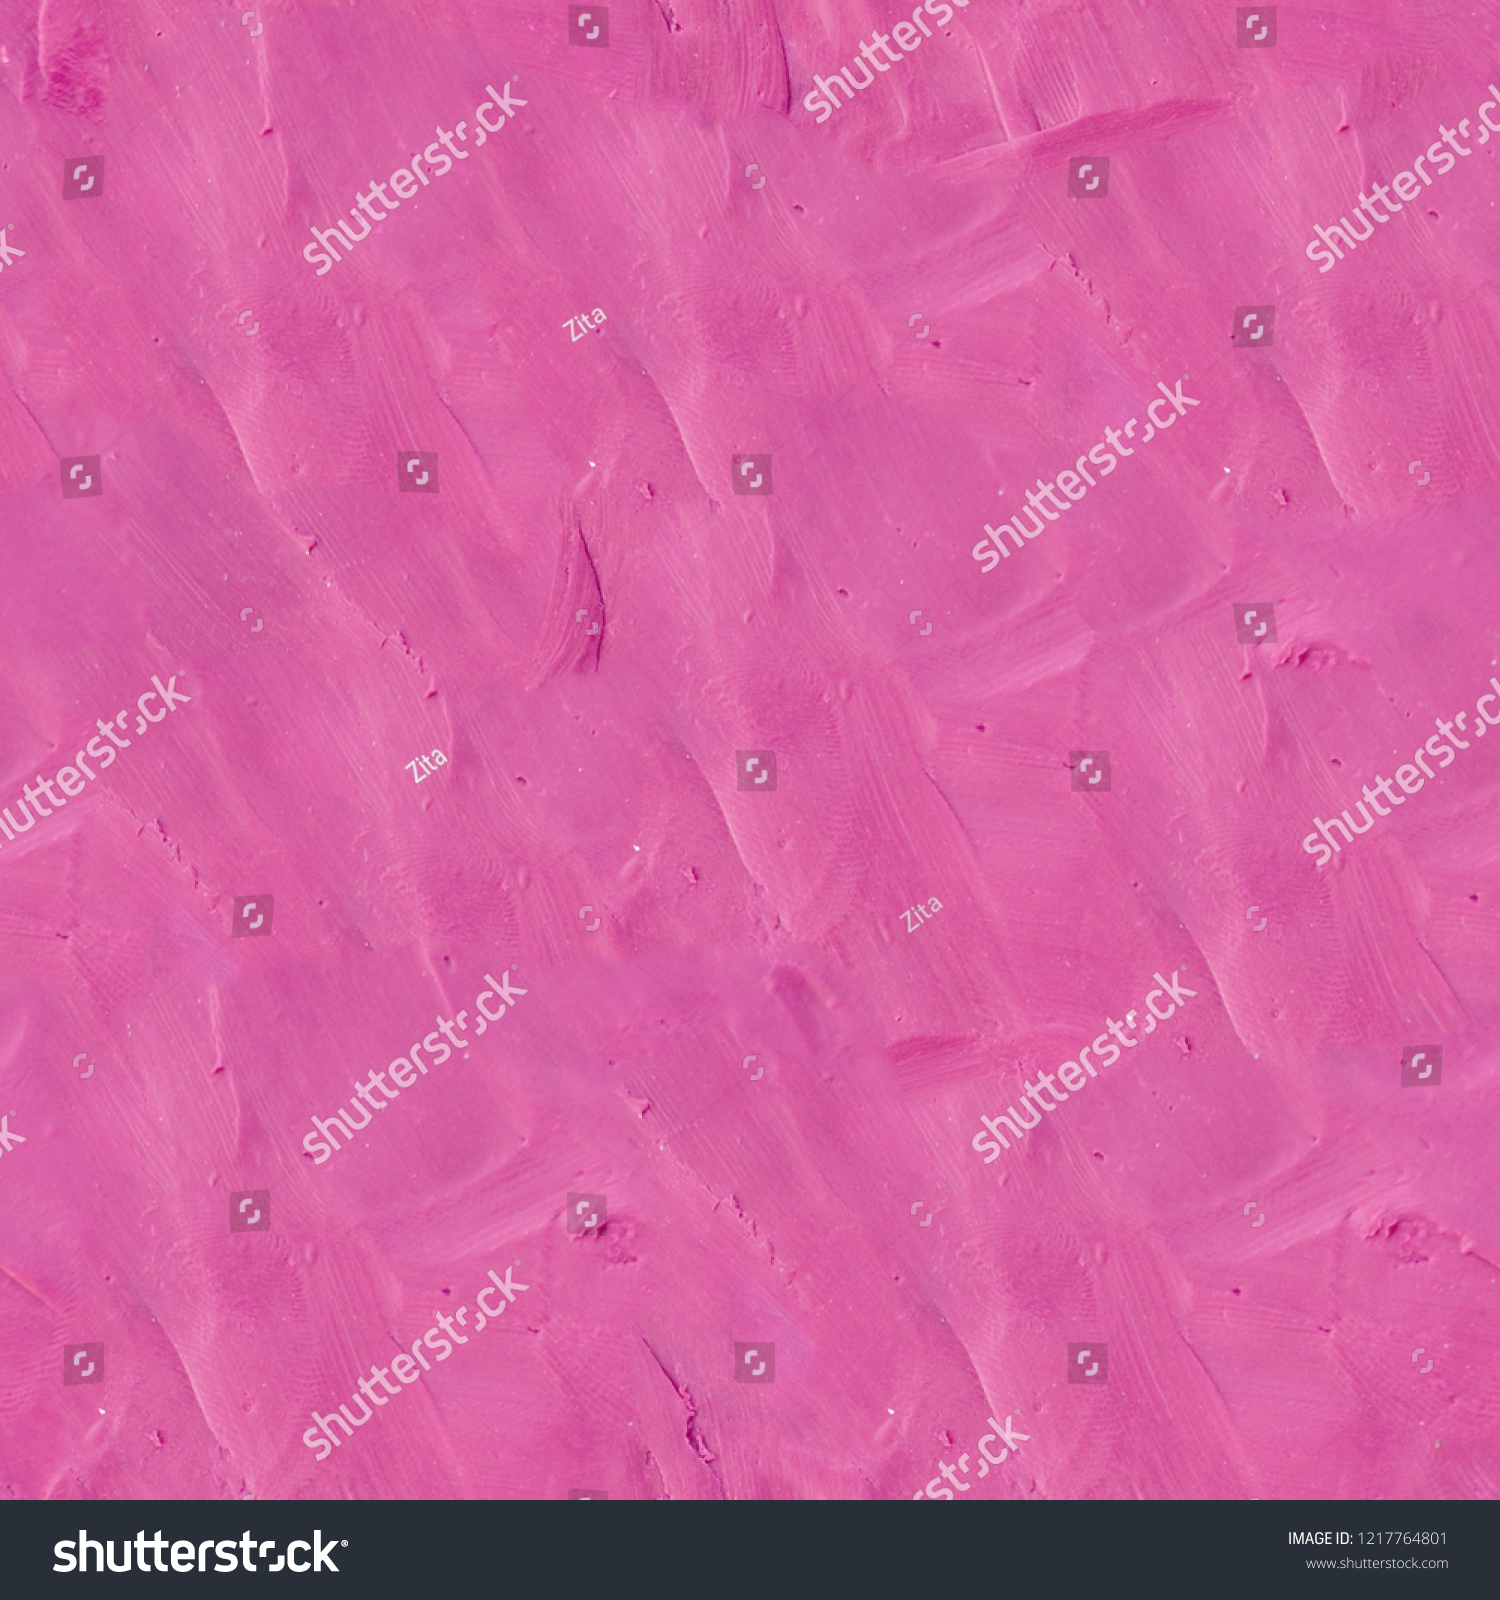 Pink Plasticine Bumpy Repeating Seamless Photo Texture Background with Fingerprints
 #1217764801